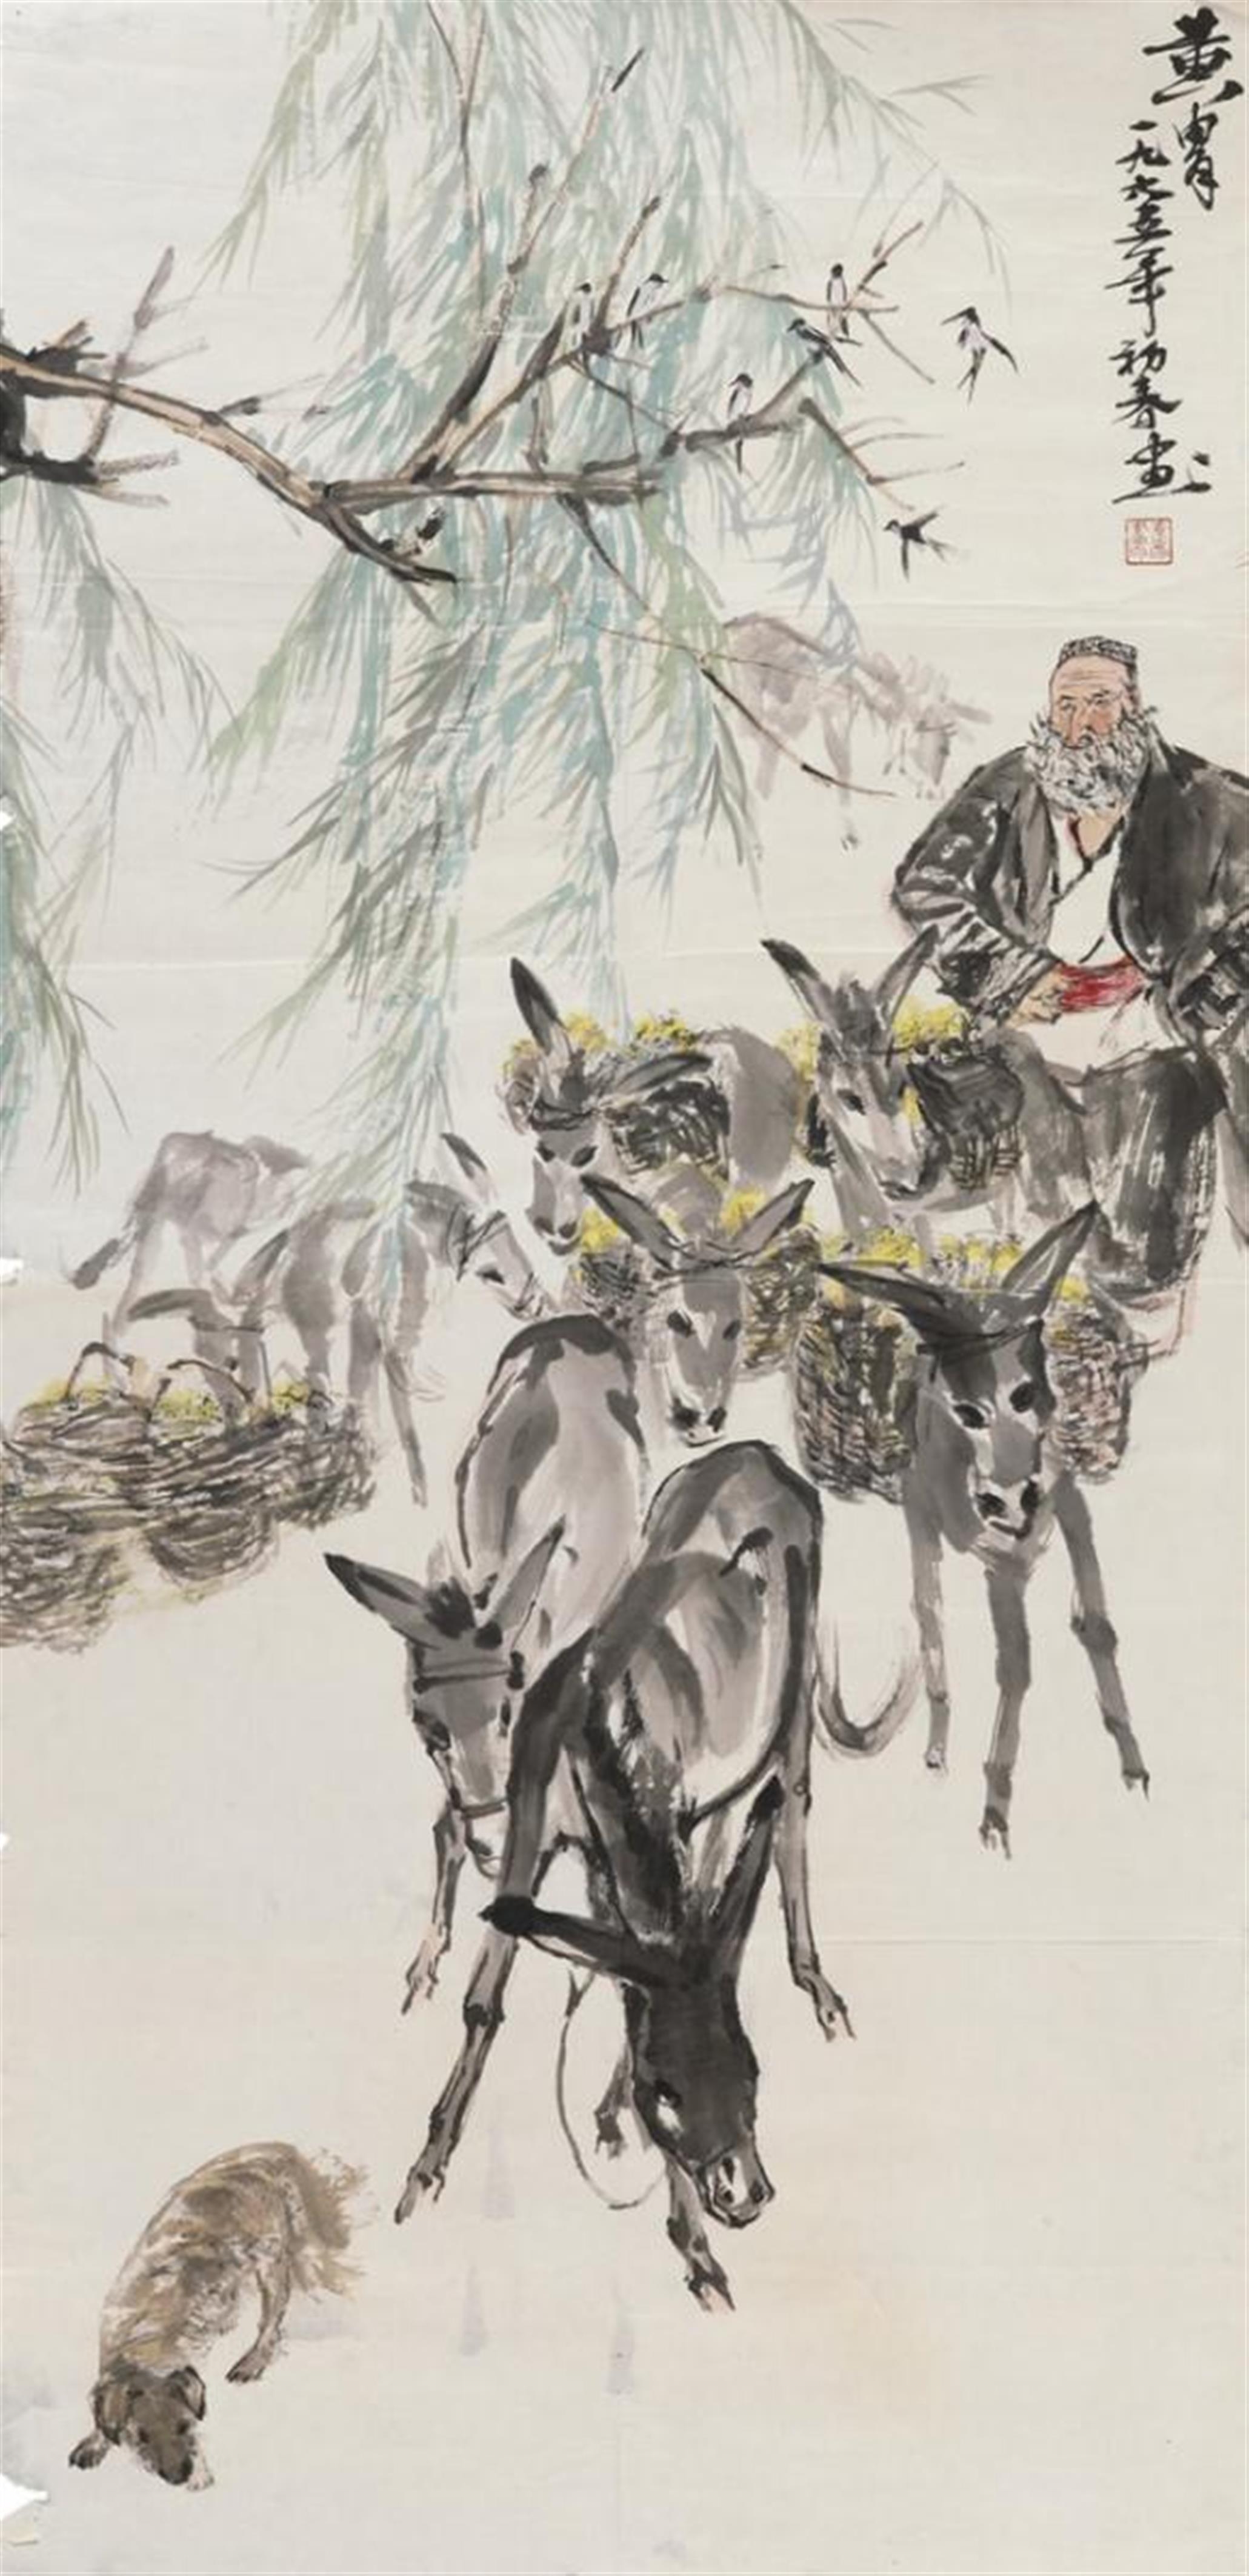 Huang Zhou, in the manner of - Old man with donkeys. Unmounted. Ink and colours on paper. Dated 1965, inscribed Huang Zhou and sealed Huang Zhou hua yin. - image-1